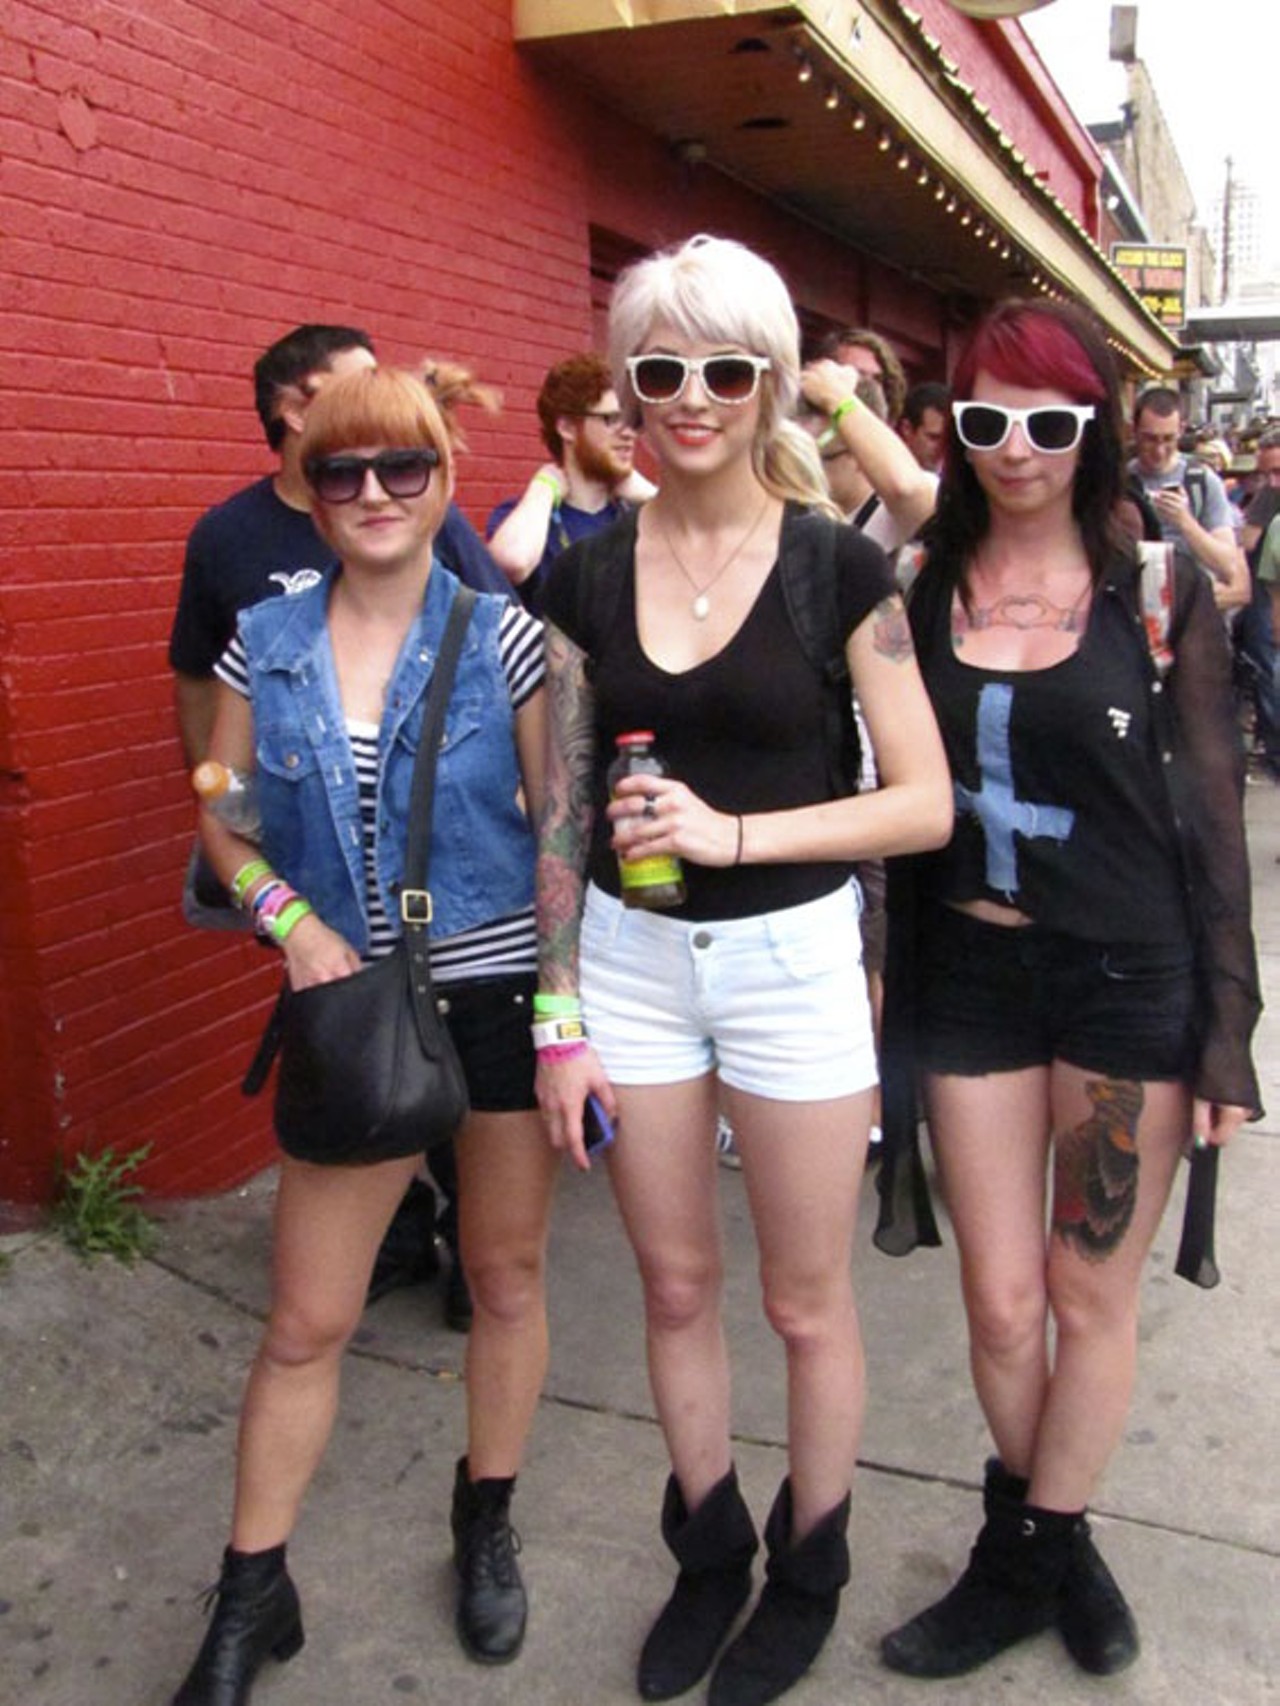 Hipster girls are not a rare sight at SXSW